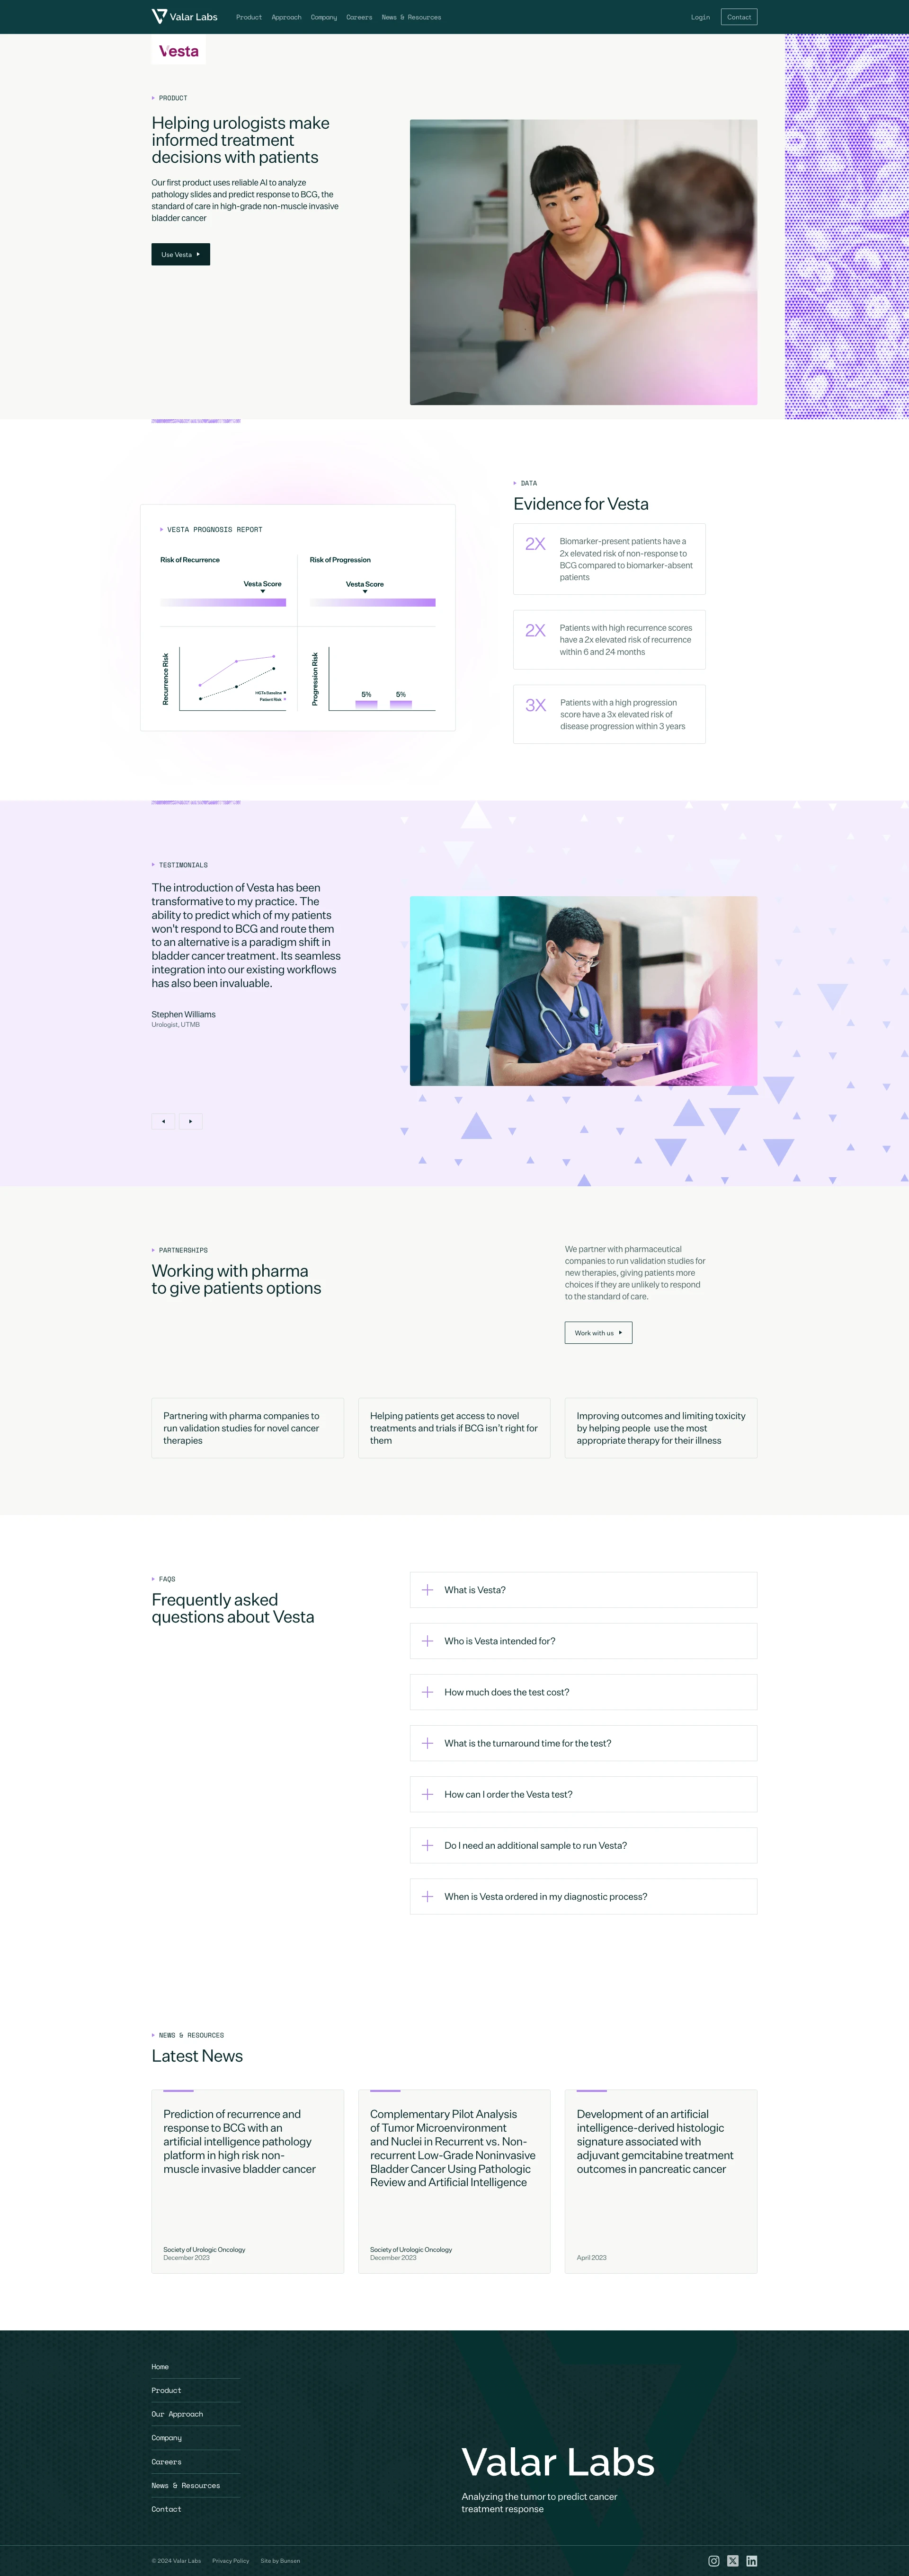 Valarlabs Landing Page Example: Valar Labs makes diagnostics that use AI to interpret solid tumors and deliver insights, so physicians and patients can make informed treatment decisions.